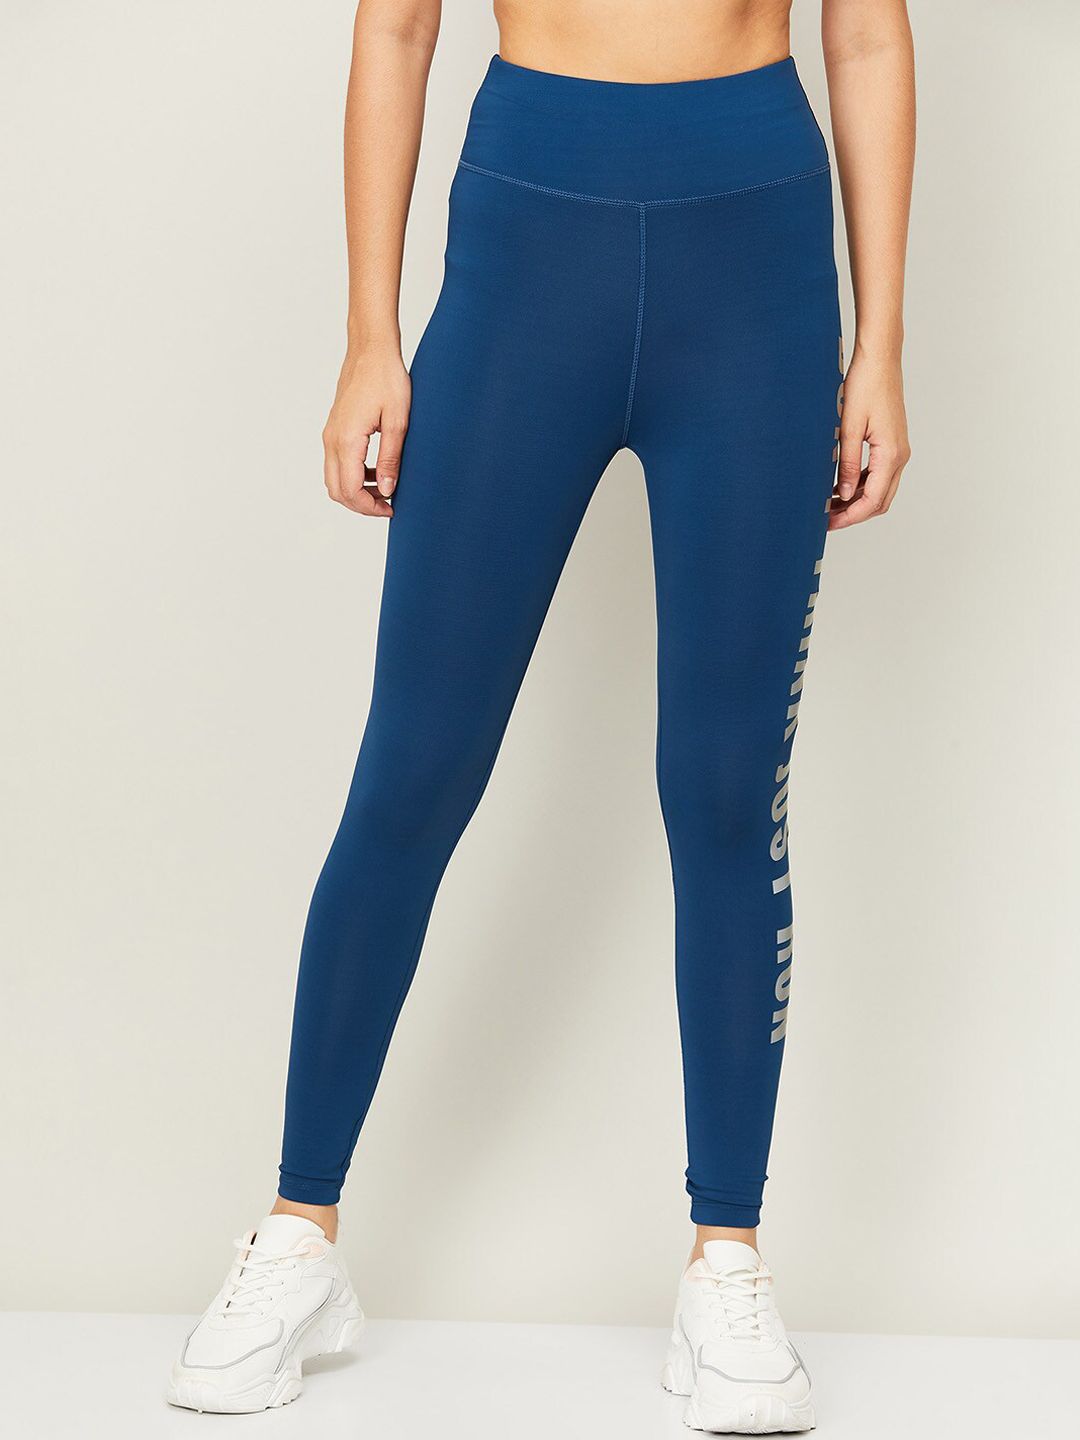 Kappa Women Blue Don't Think Just Run Tights Price in India